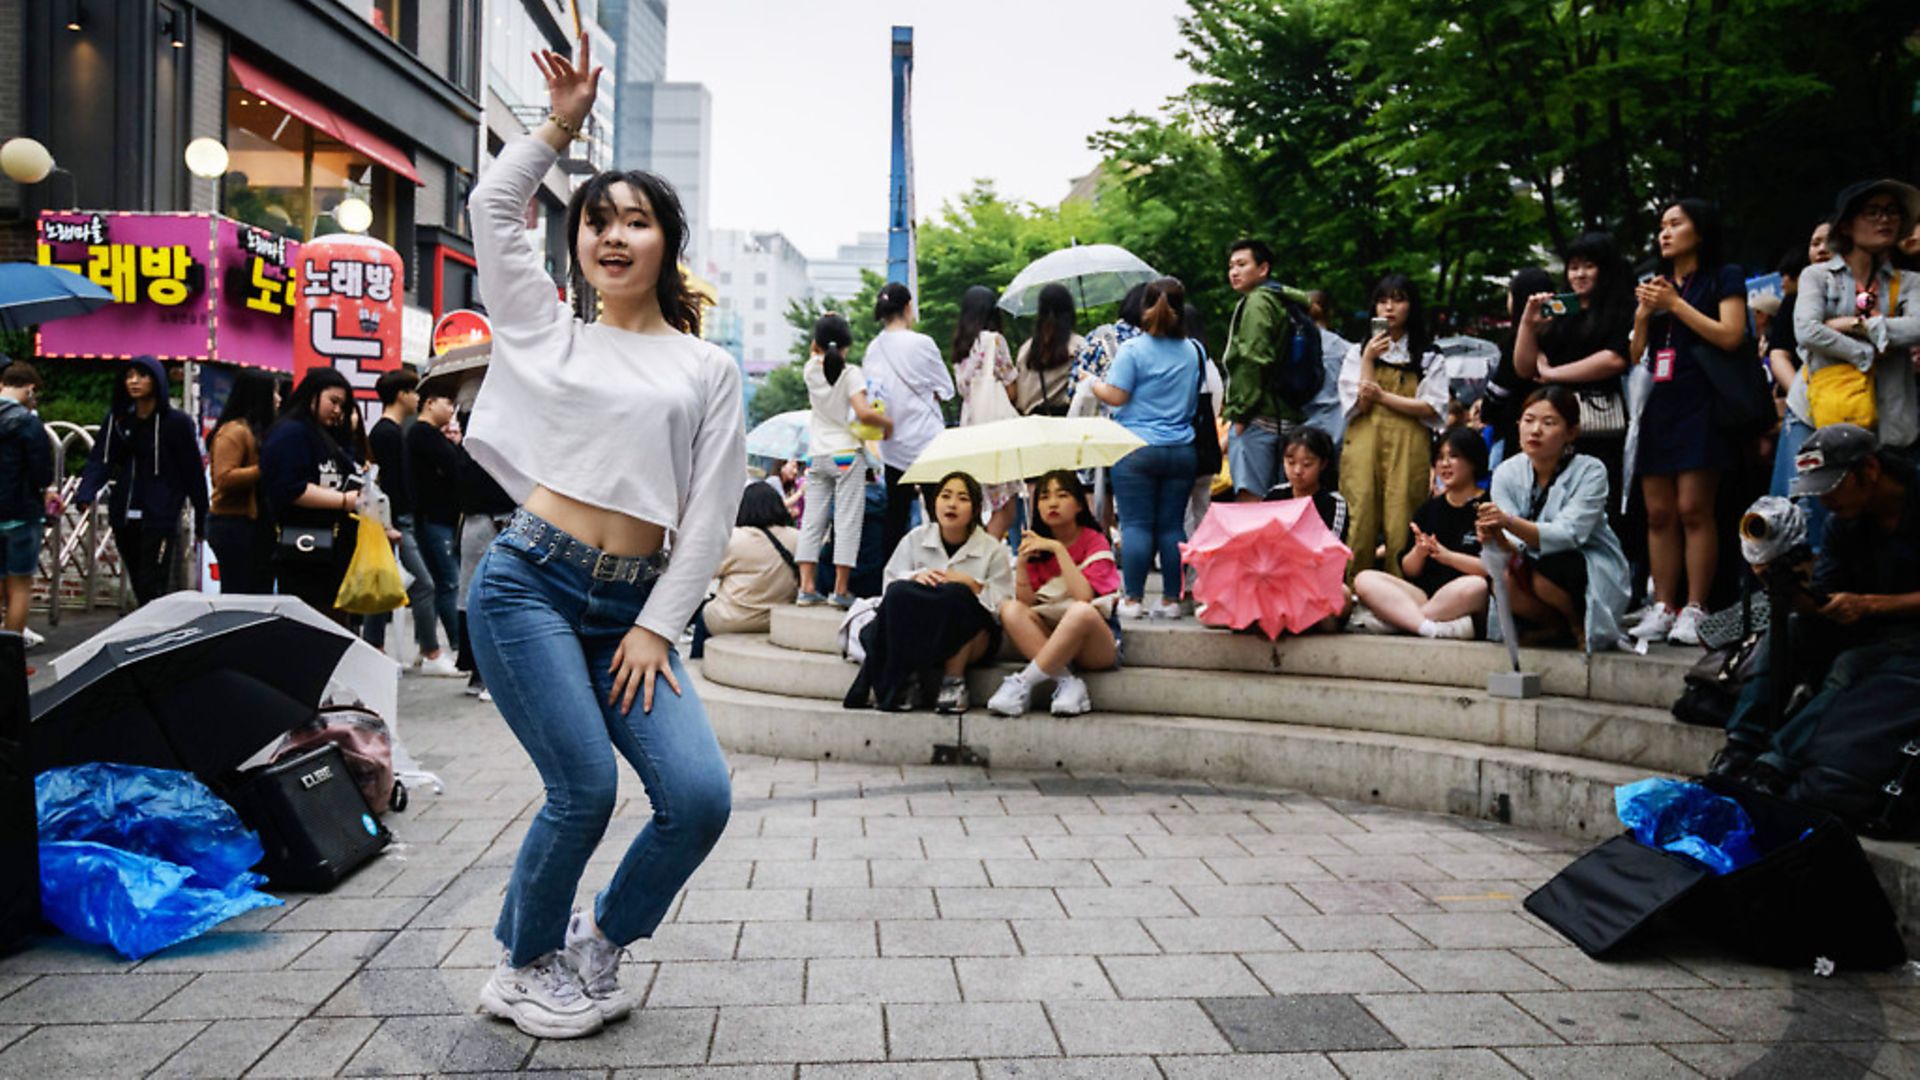 A dancer performs a k-pop routine for spectators on a street in the Hongdae district of Seoul. (Photo by Ed JONES / AFP) - Credit: AFP/Getty Images